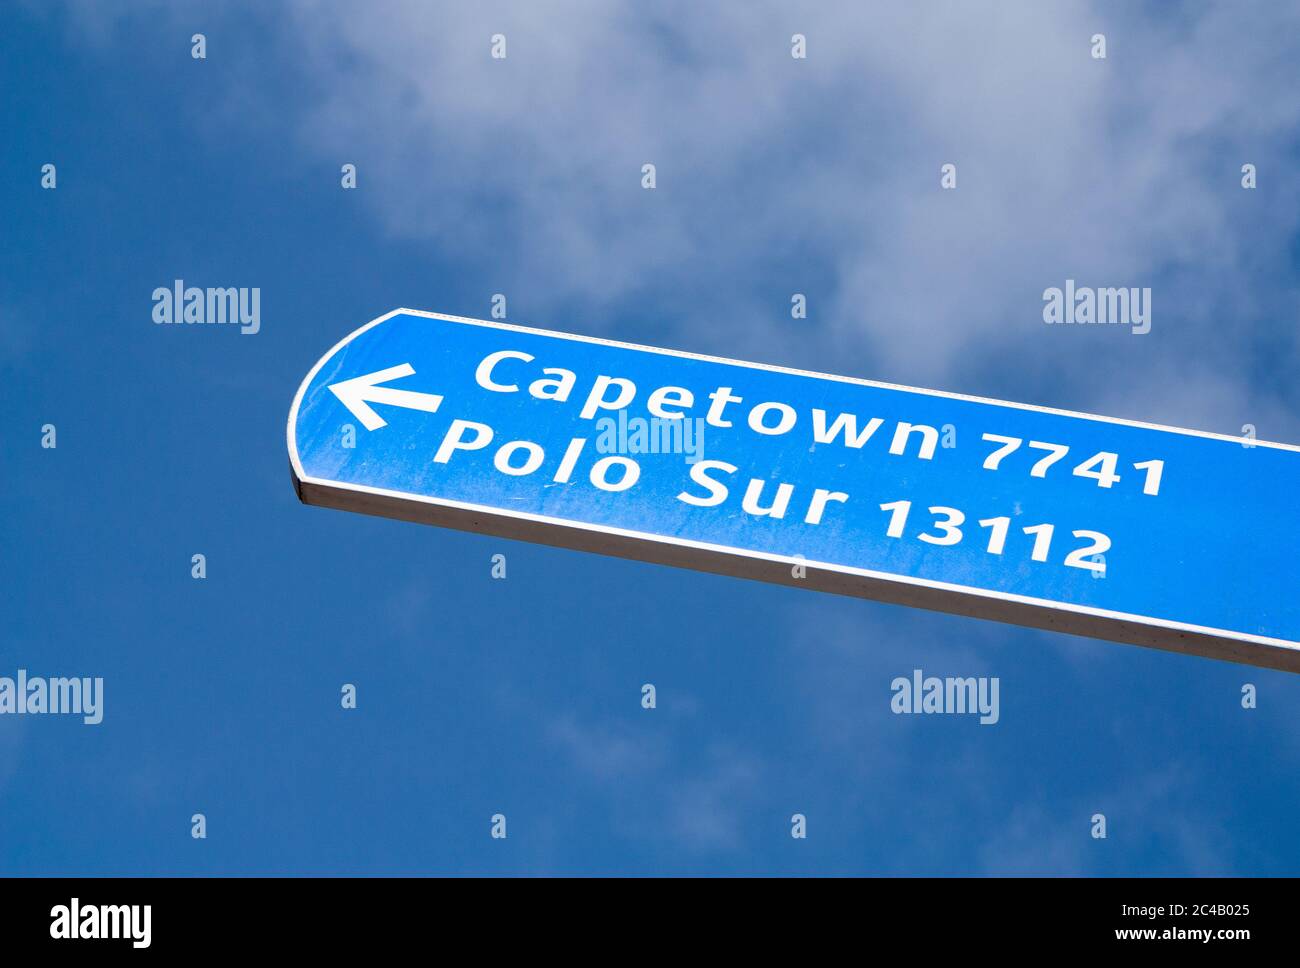 Capetown and South Pole (polo sur in Spanish) sign Stock Photo